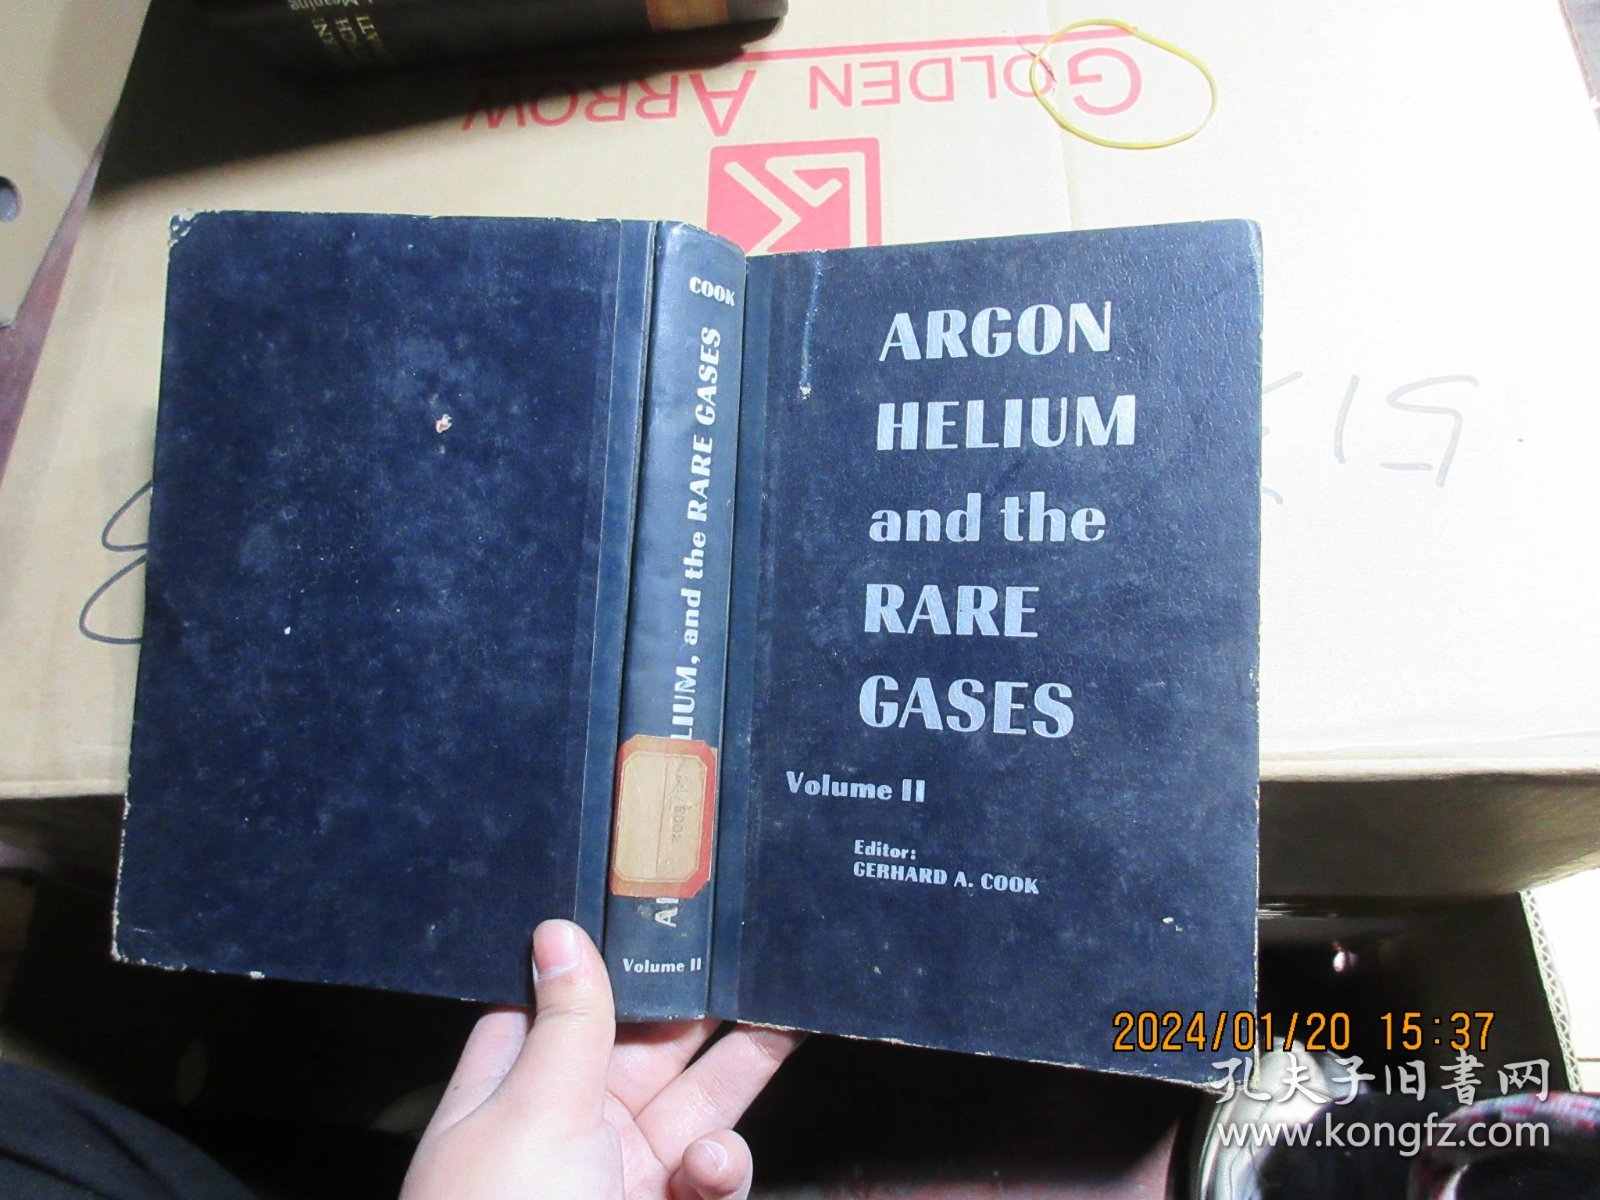 ARGON,HELIUM AND THE RARE GASES 精 16963